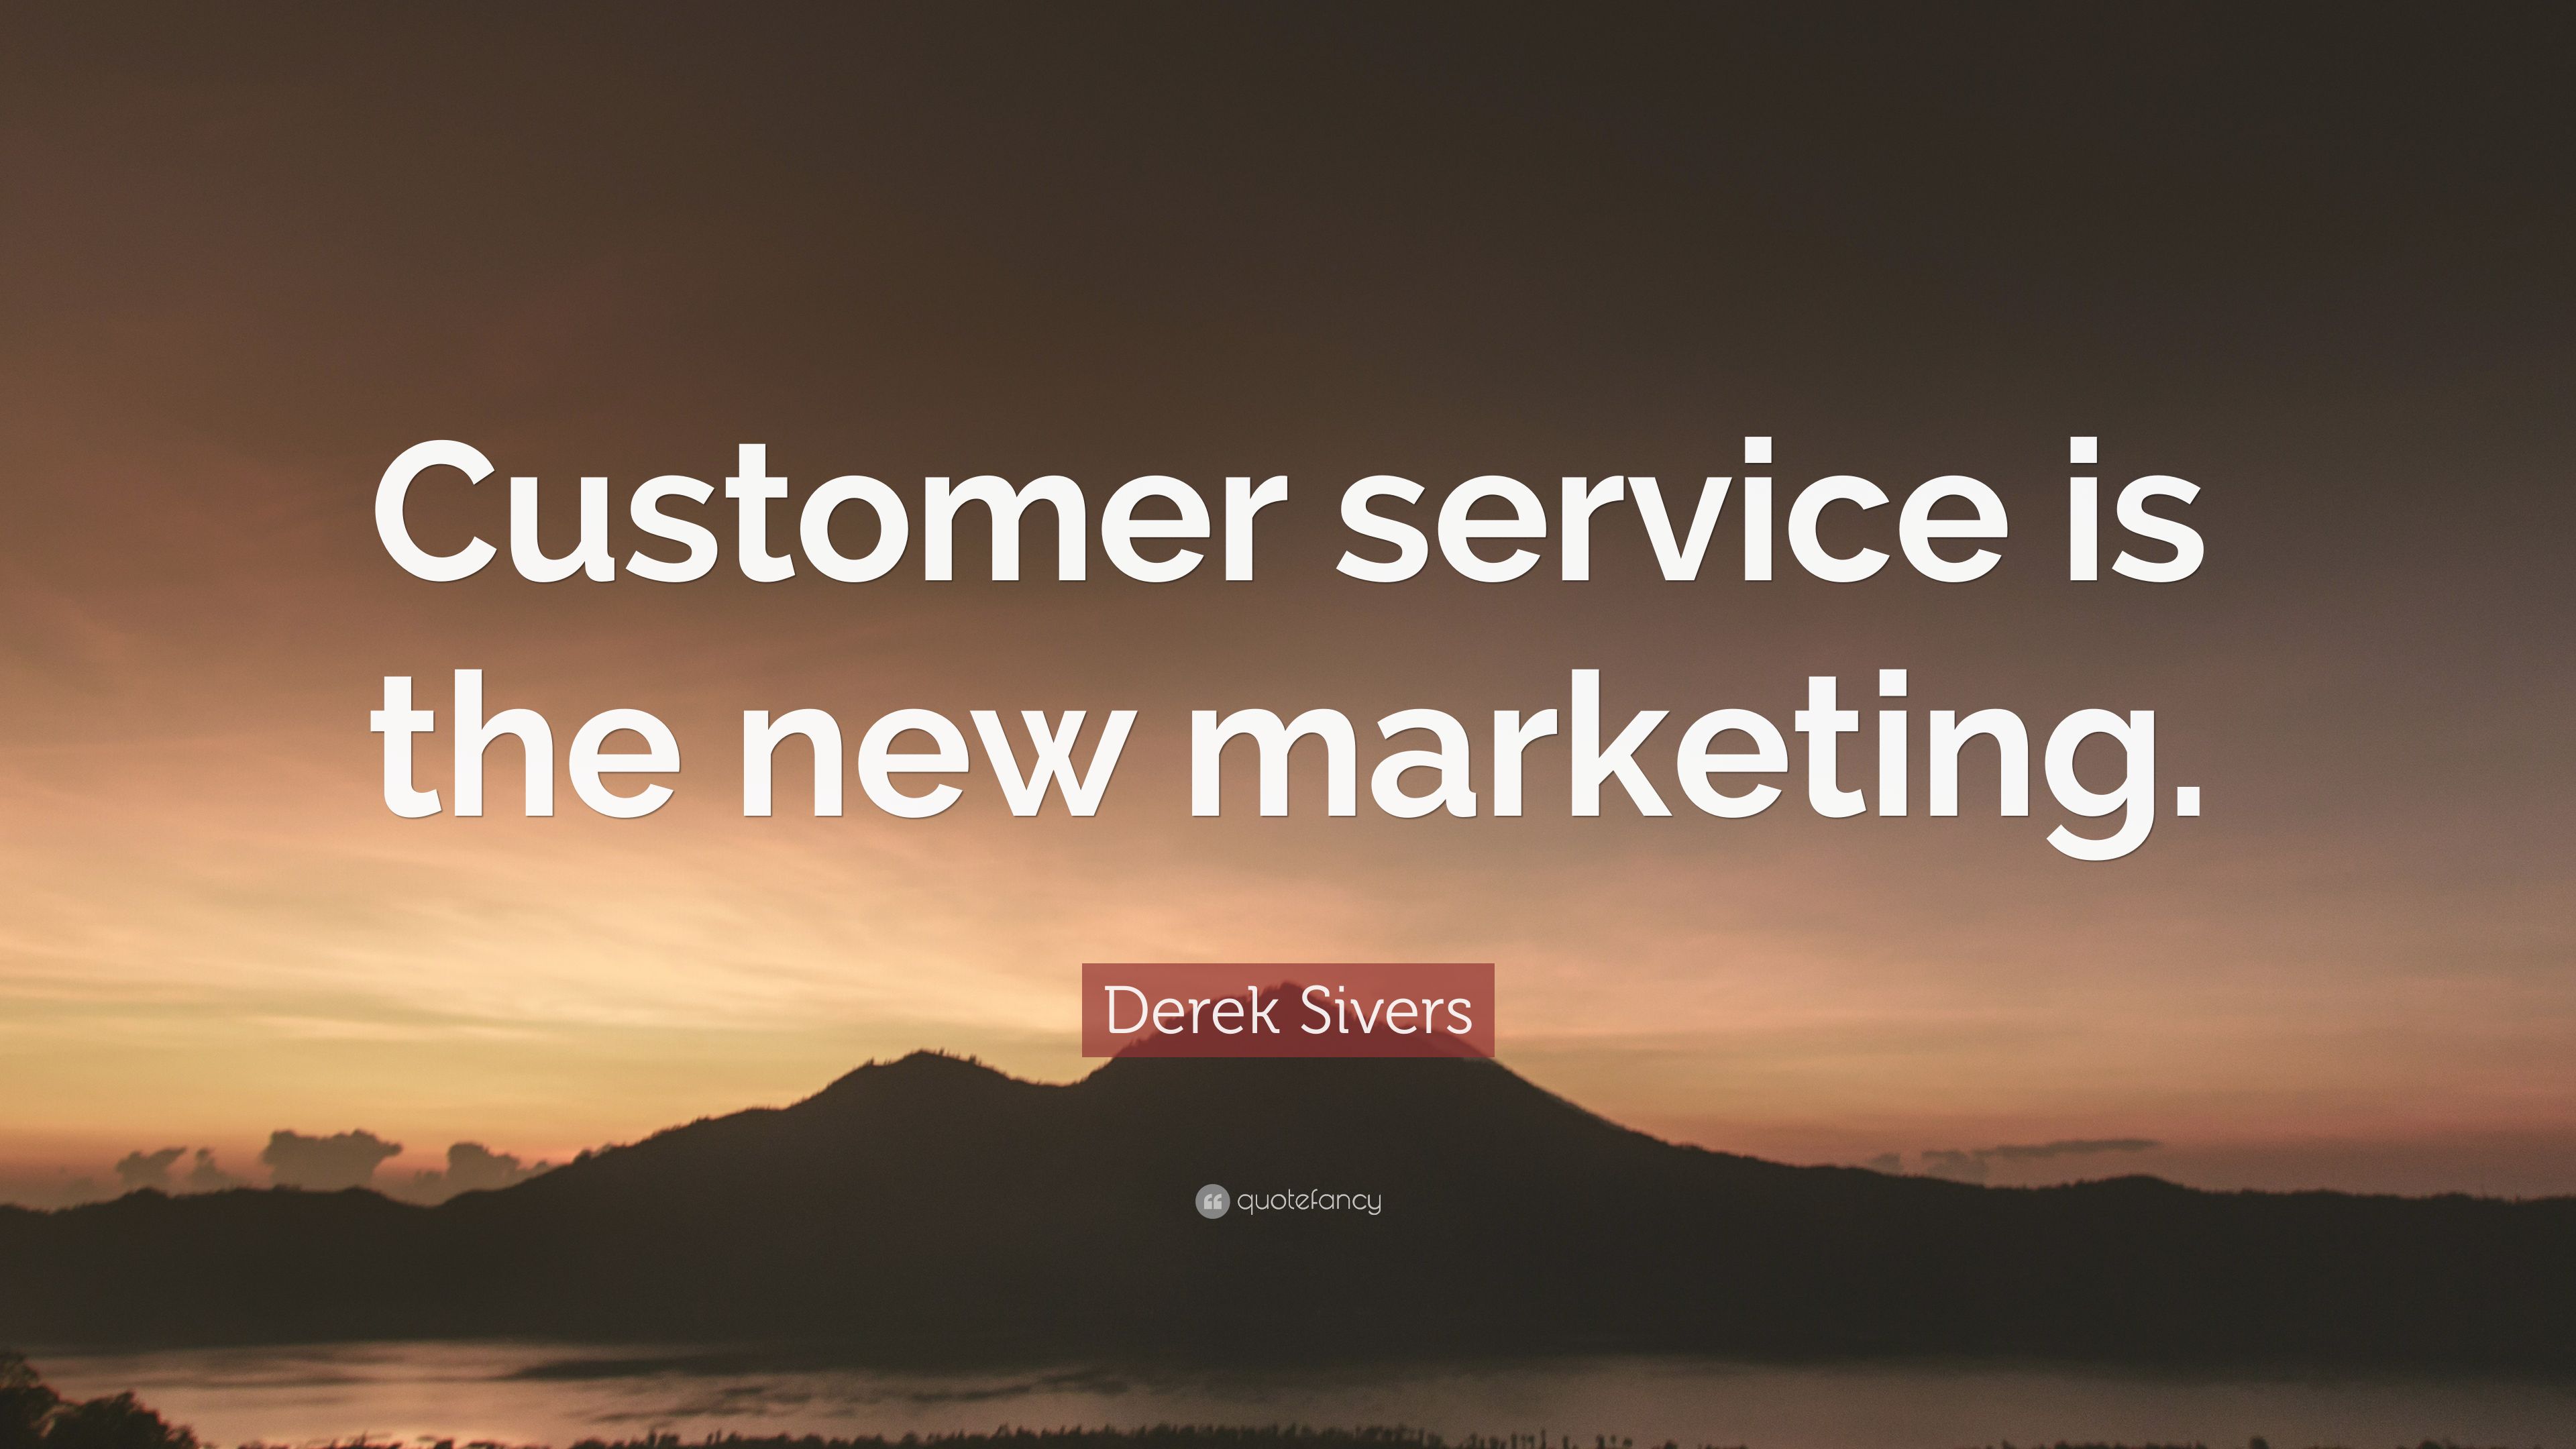 Derek Sivers Quote: “Customer service is the new marketing.” 9